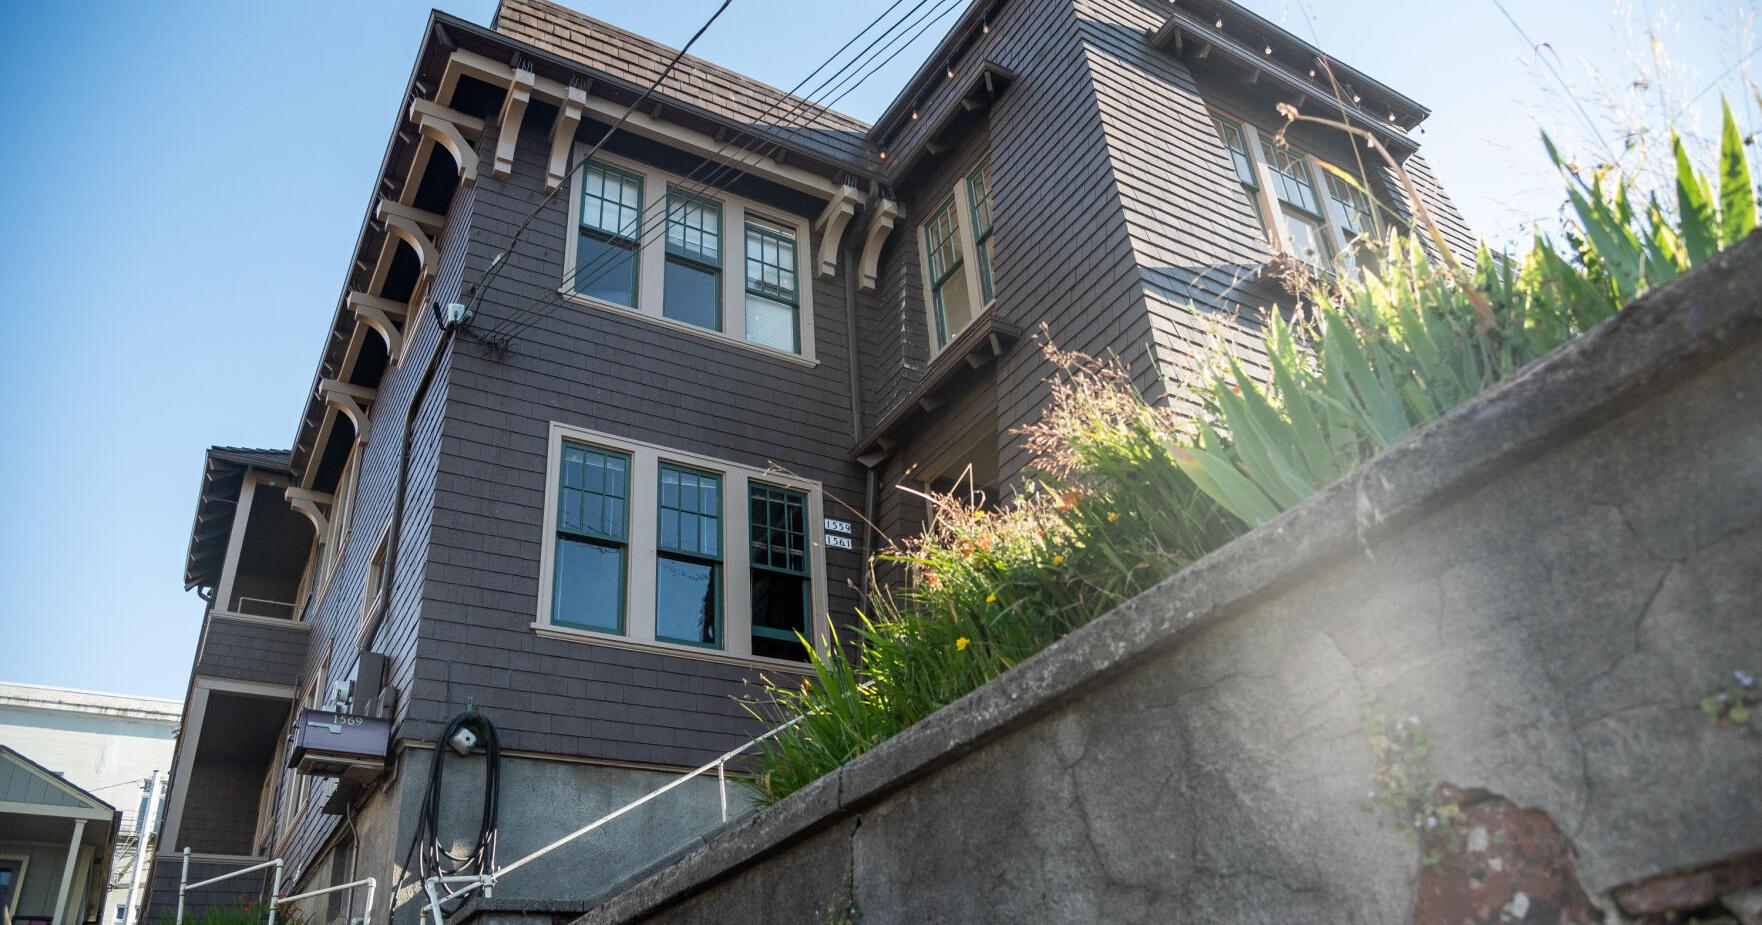 At a historic property downtown, a tug of war over vacation rentals